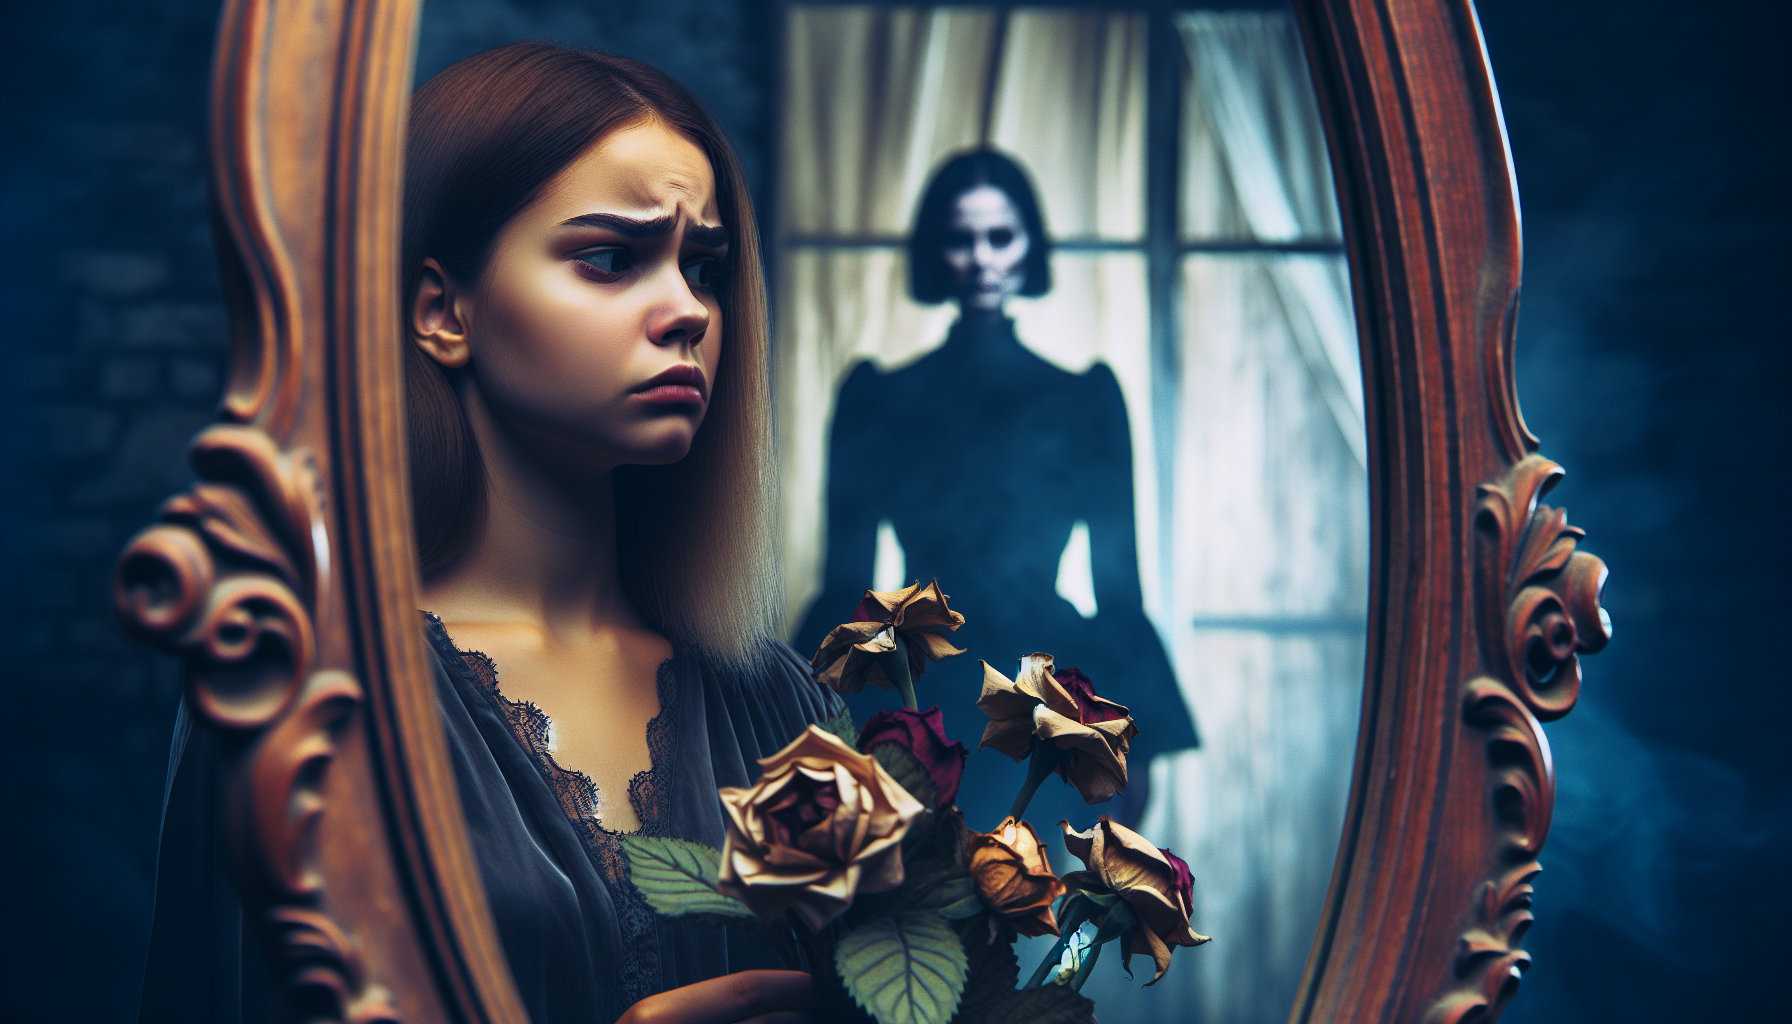 A person looking in the mirror with a doubtful expression, reflecting the impact of a narcissistic mother on her daughter's self-esteem